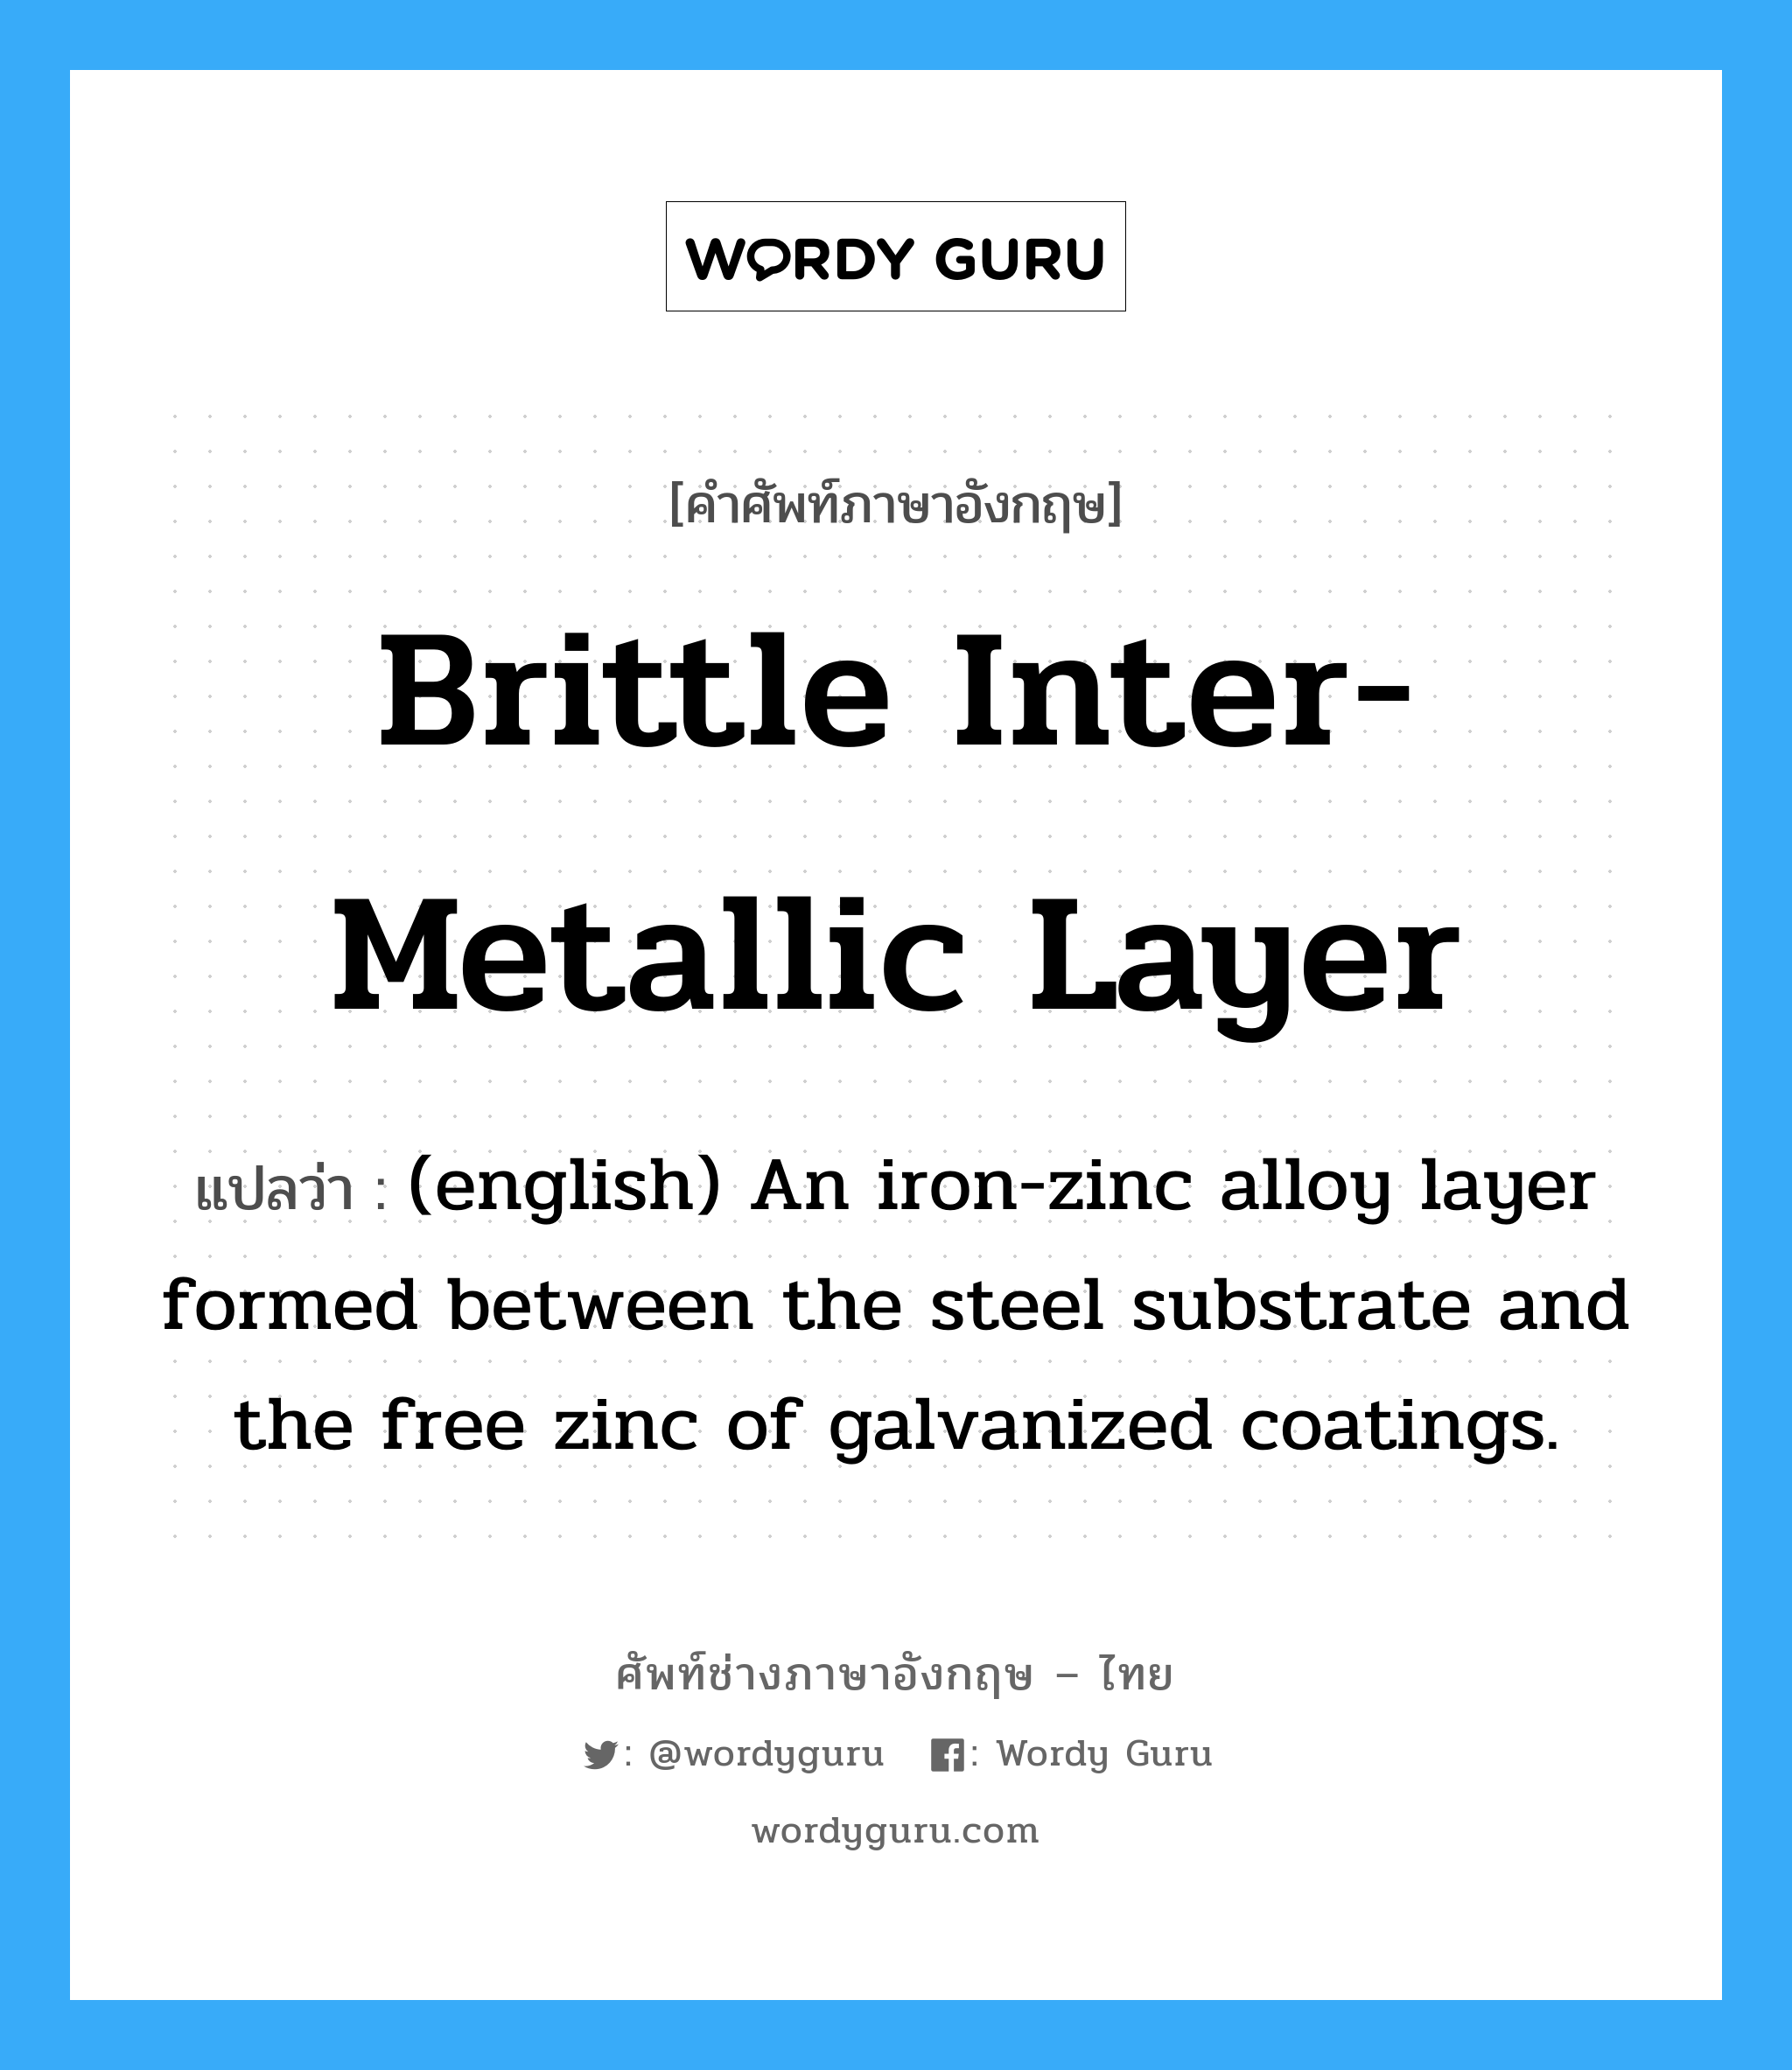 Brittle Inter-metallic Layer แปลว่า?, คำศัพท์ช่างภาษาอังกฤษ - ไทย Brittle Inter-metallic Layer คำศัพท์ภาษาอังกฤษ Brittle Inter-metallic Layer แปลว่า (english) An iron-zinc alloy layer formed between the steel substrate and the free zinc of galvanized coatings.